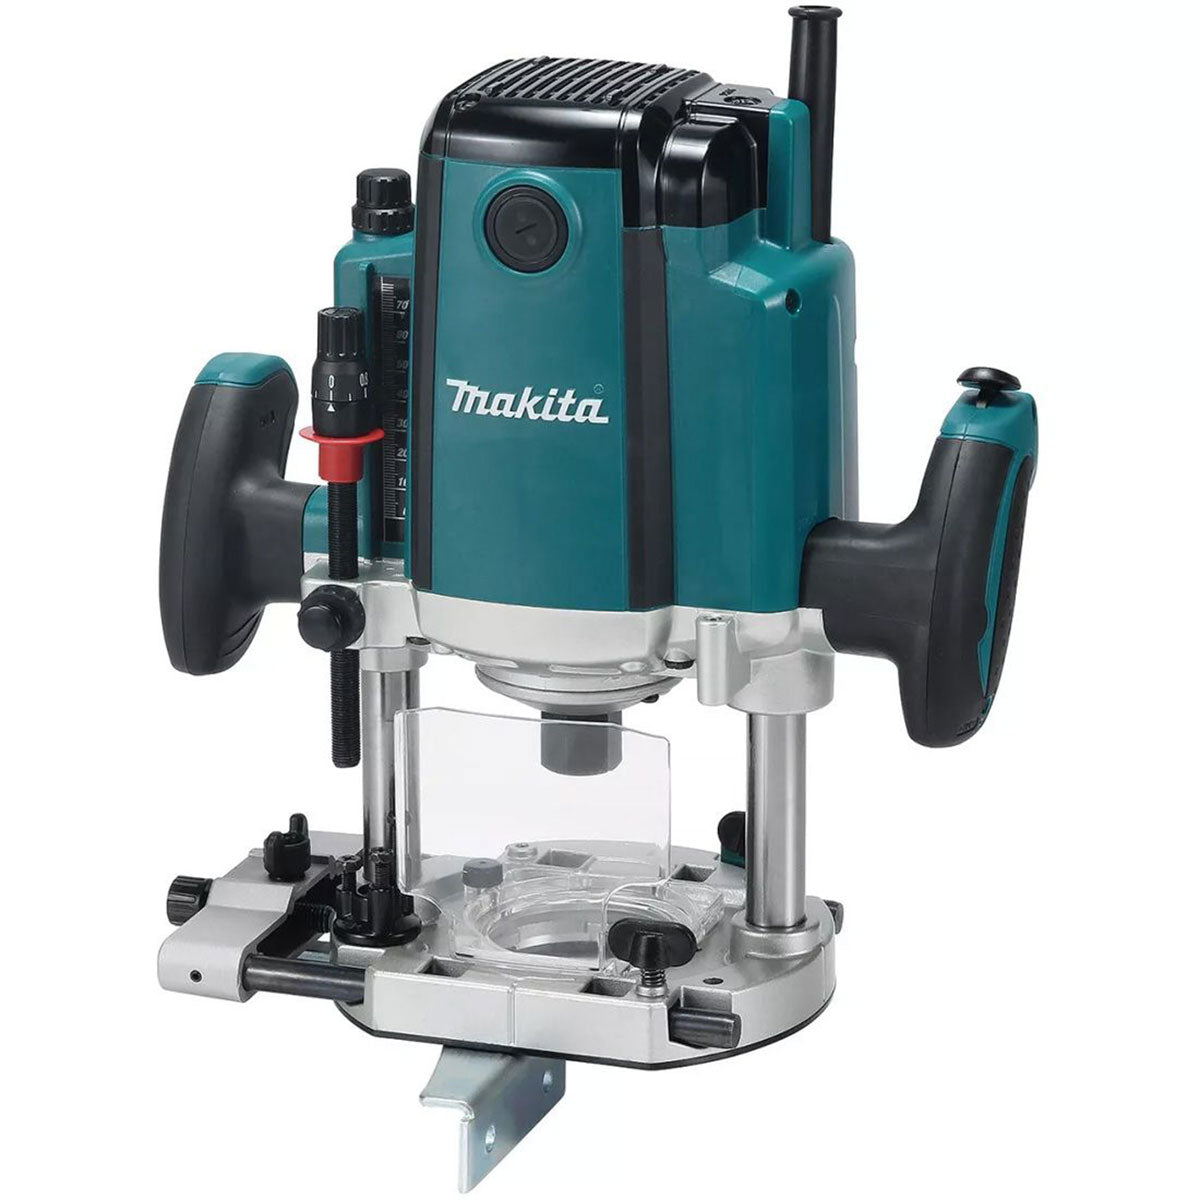 Makita RP1803/2 1/2" Plunge Router 240V/1650W